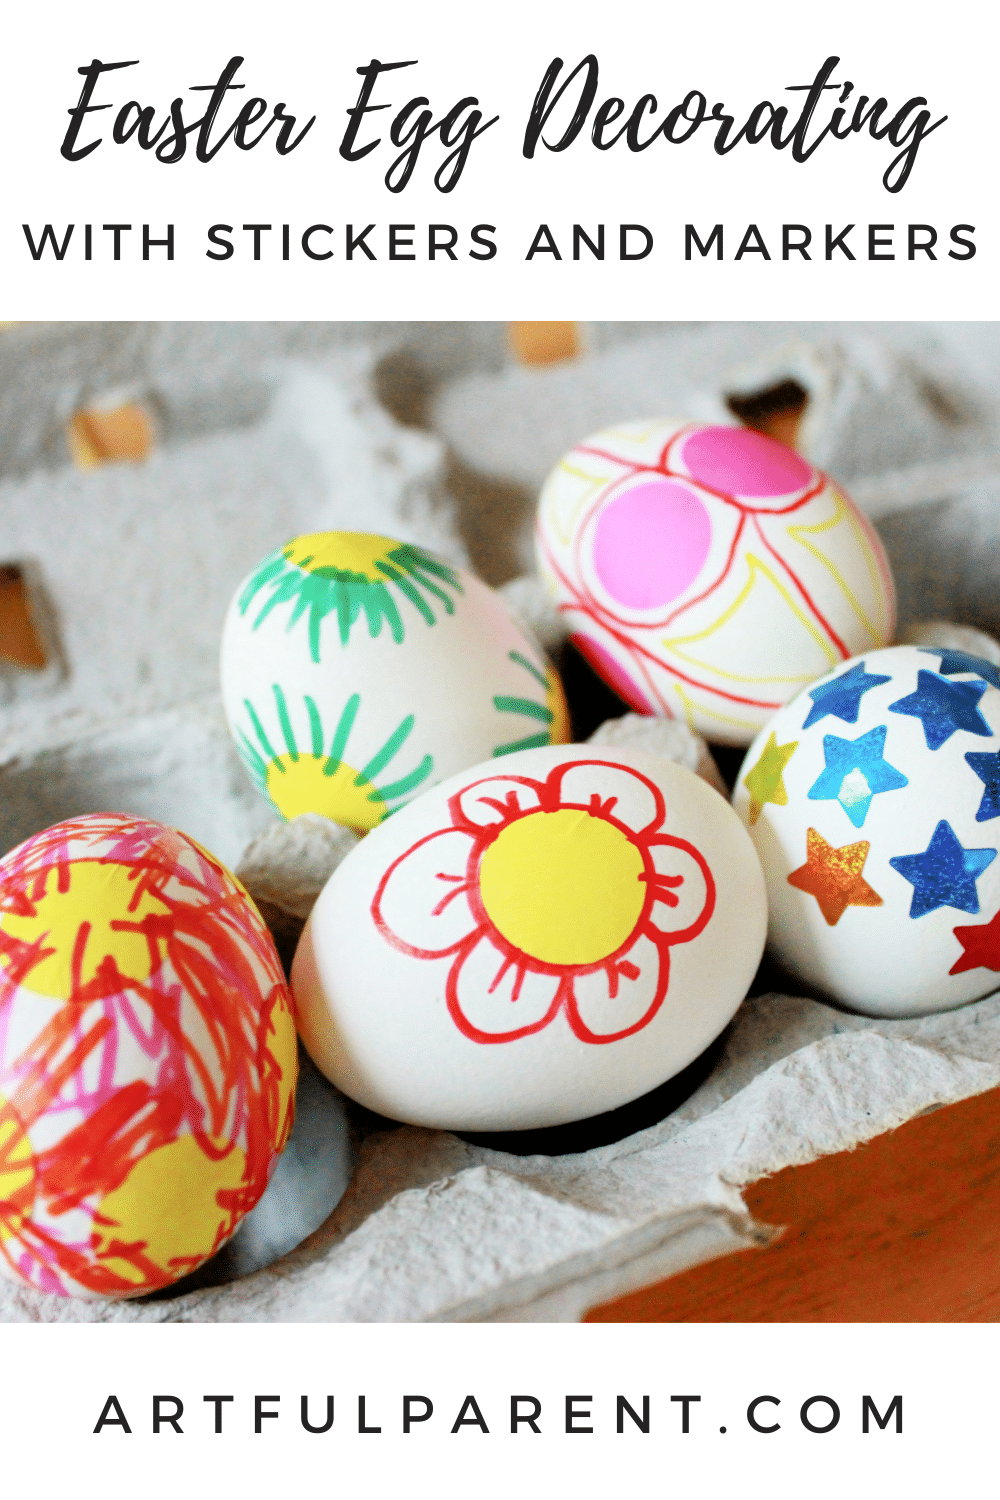 egg decorating with stickers pinterest